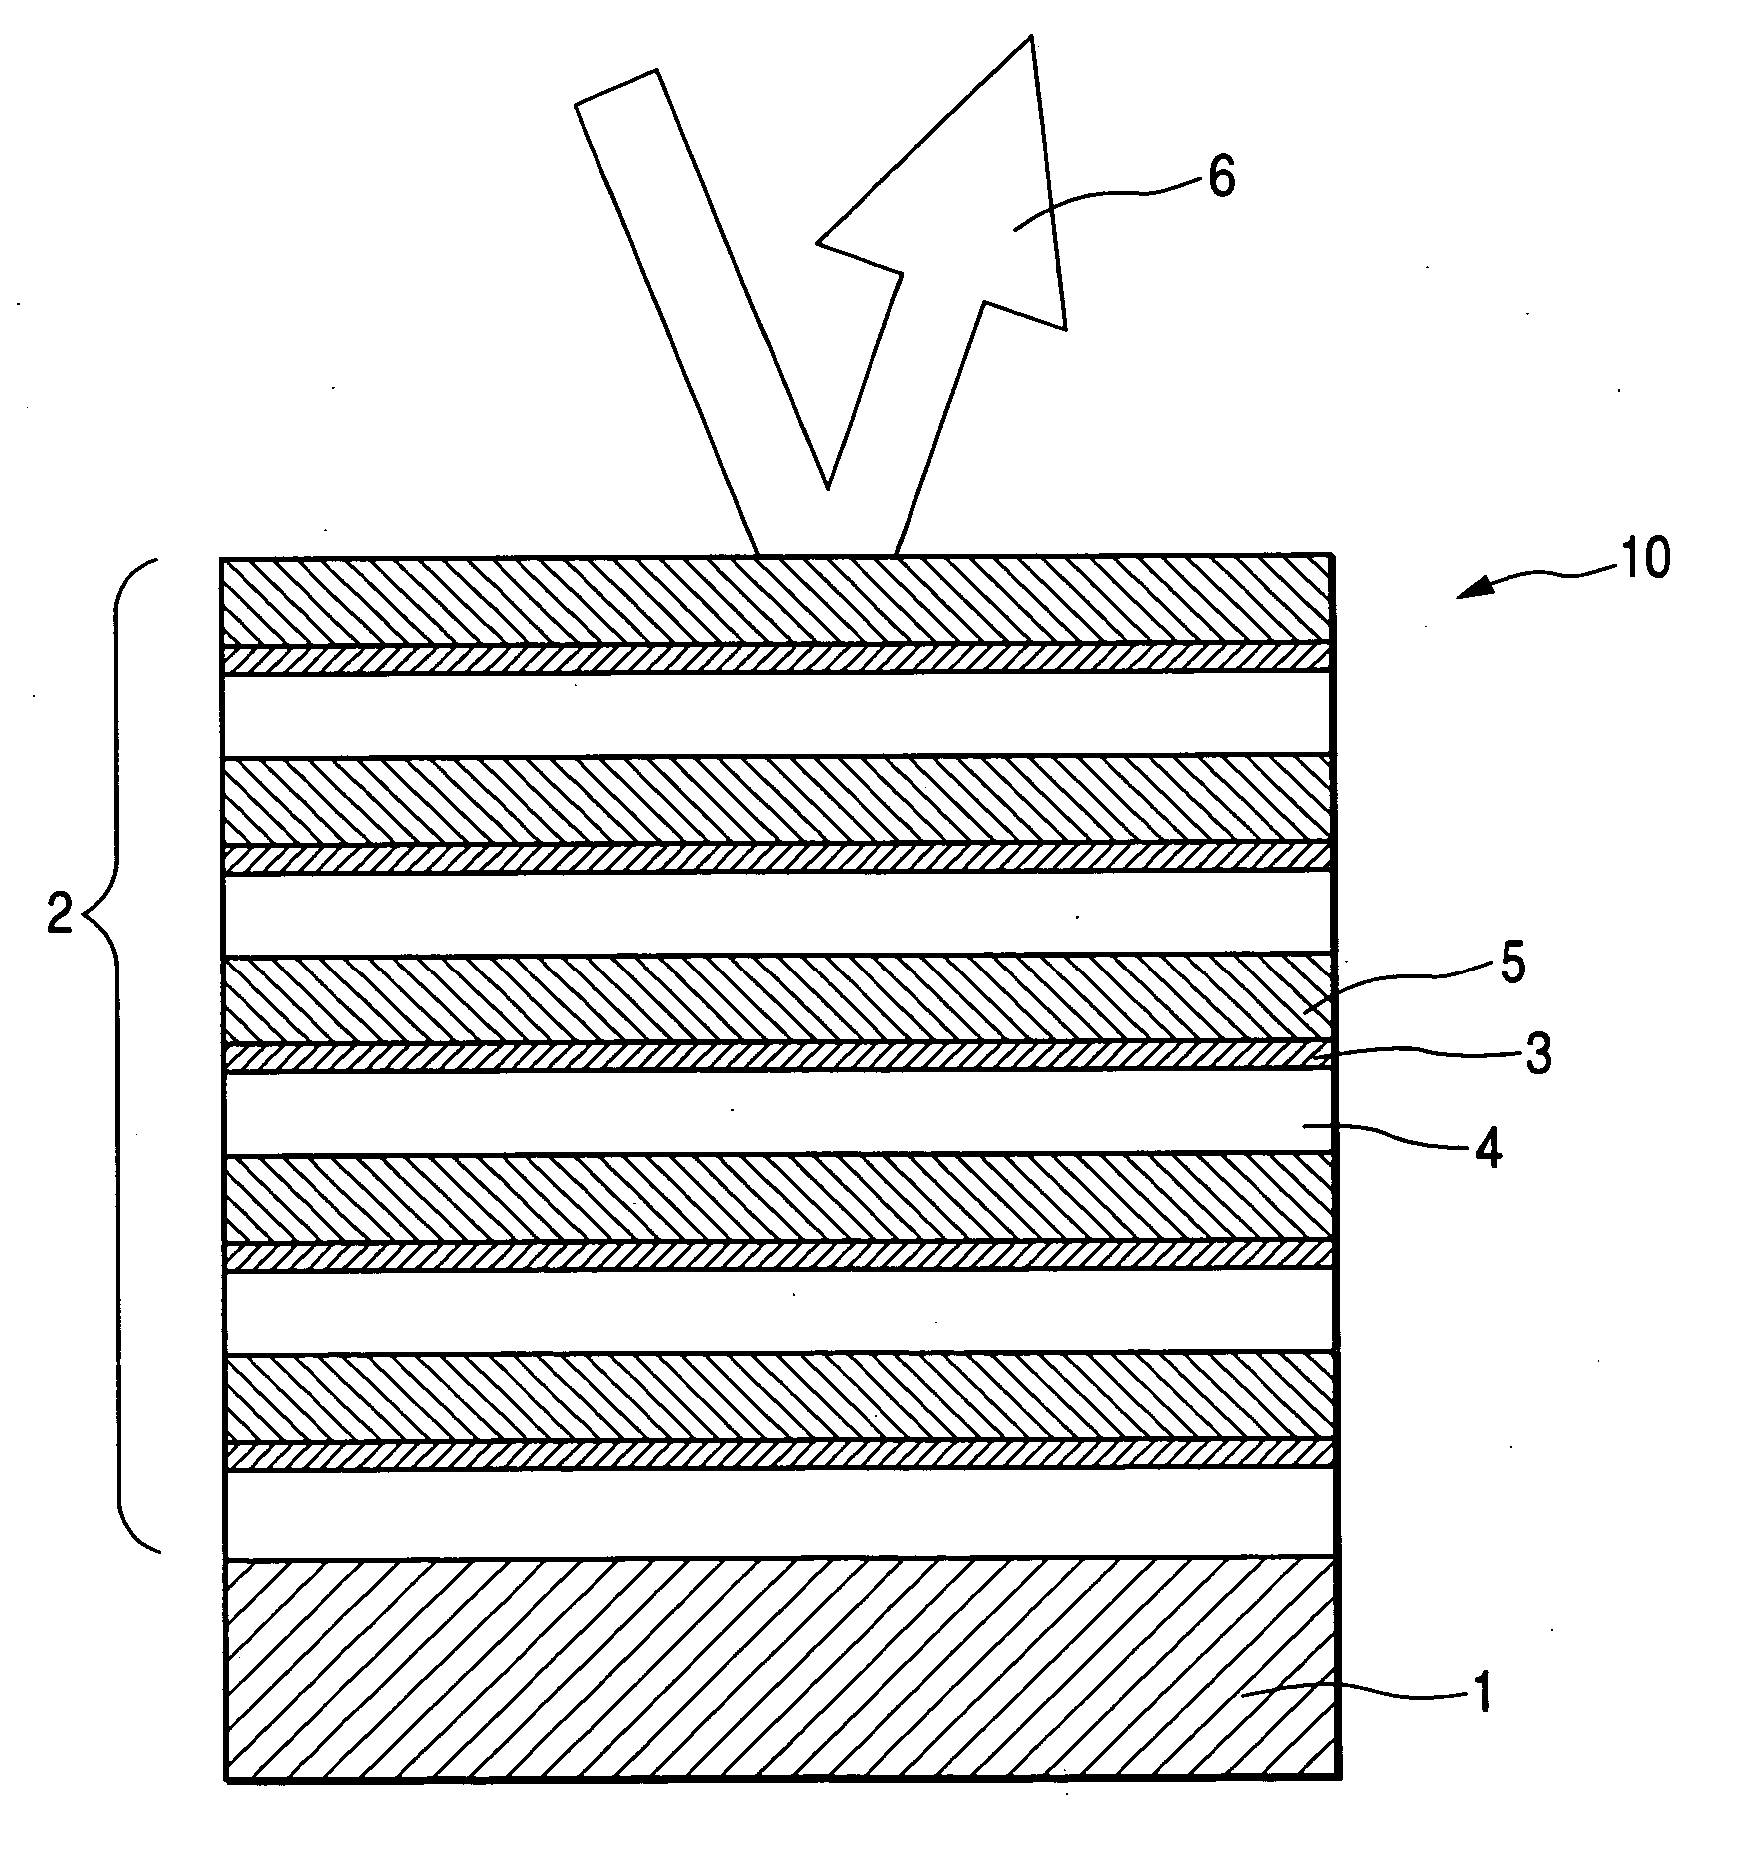 Multilayer film reflector for soft X-rays and manufacturing method thereof